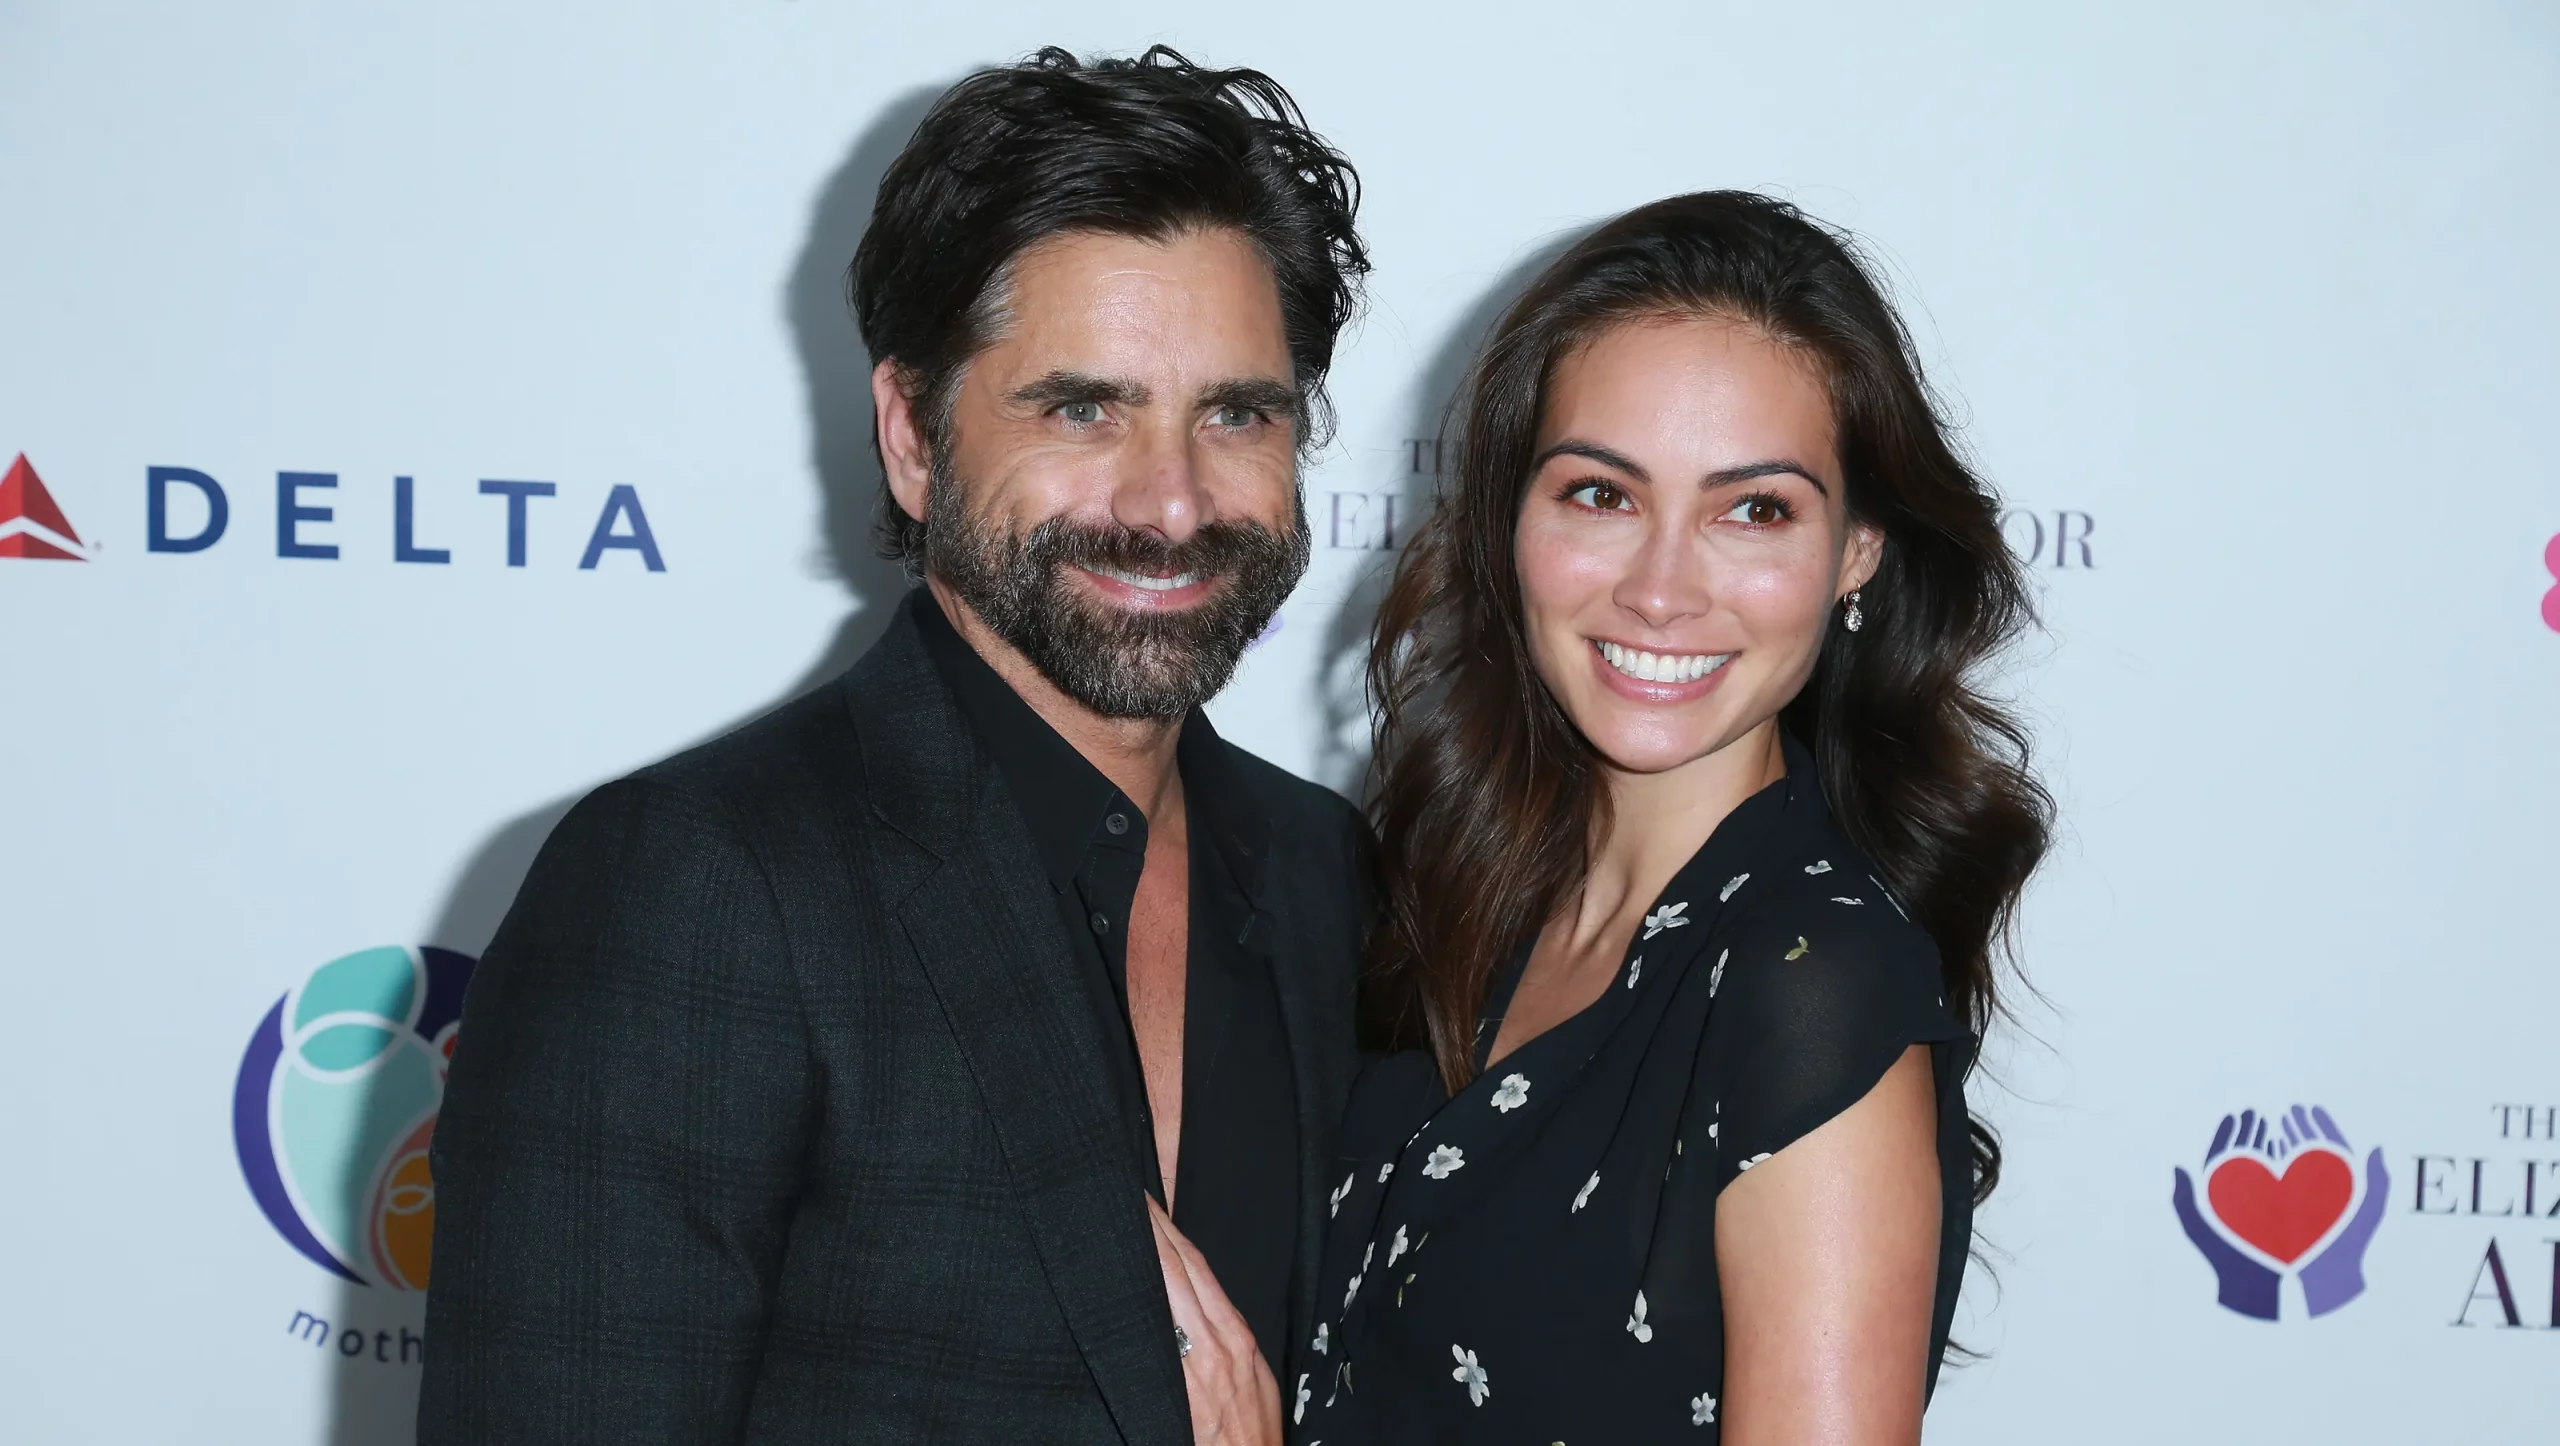 John Stamos and his wife